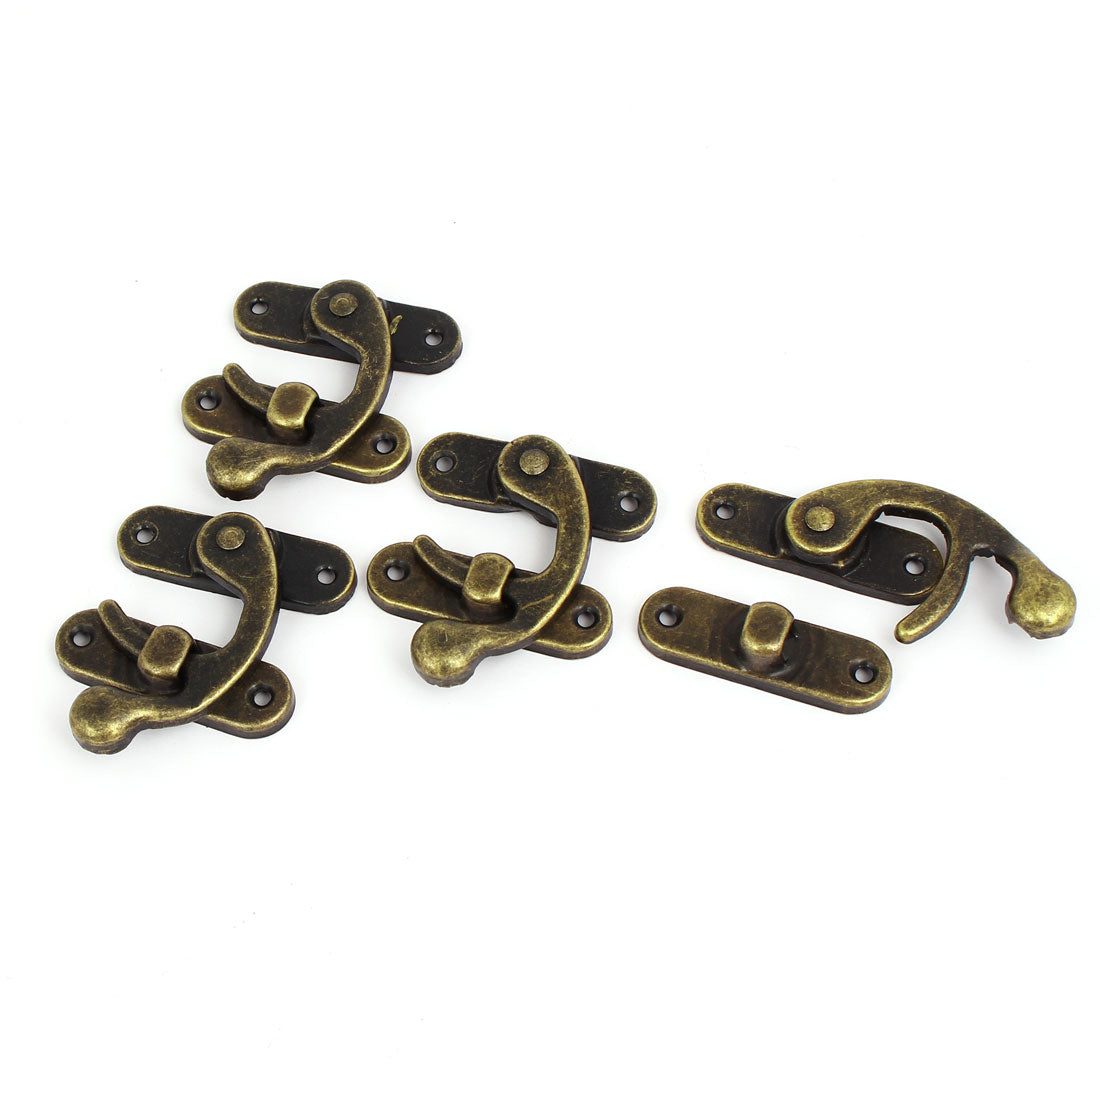 uxcell Uxcell Suitcase Trunk Box Right Swing Arm Clasp Latches Toggle Hasp Bronze Tone 4PCS